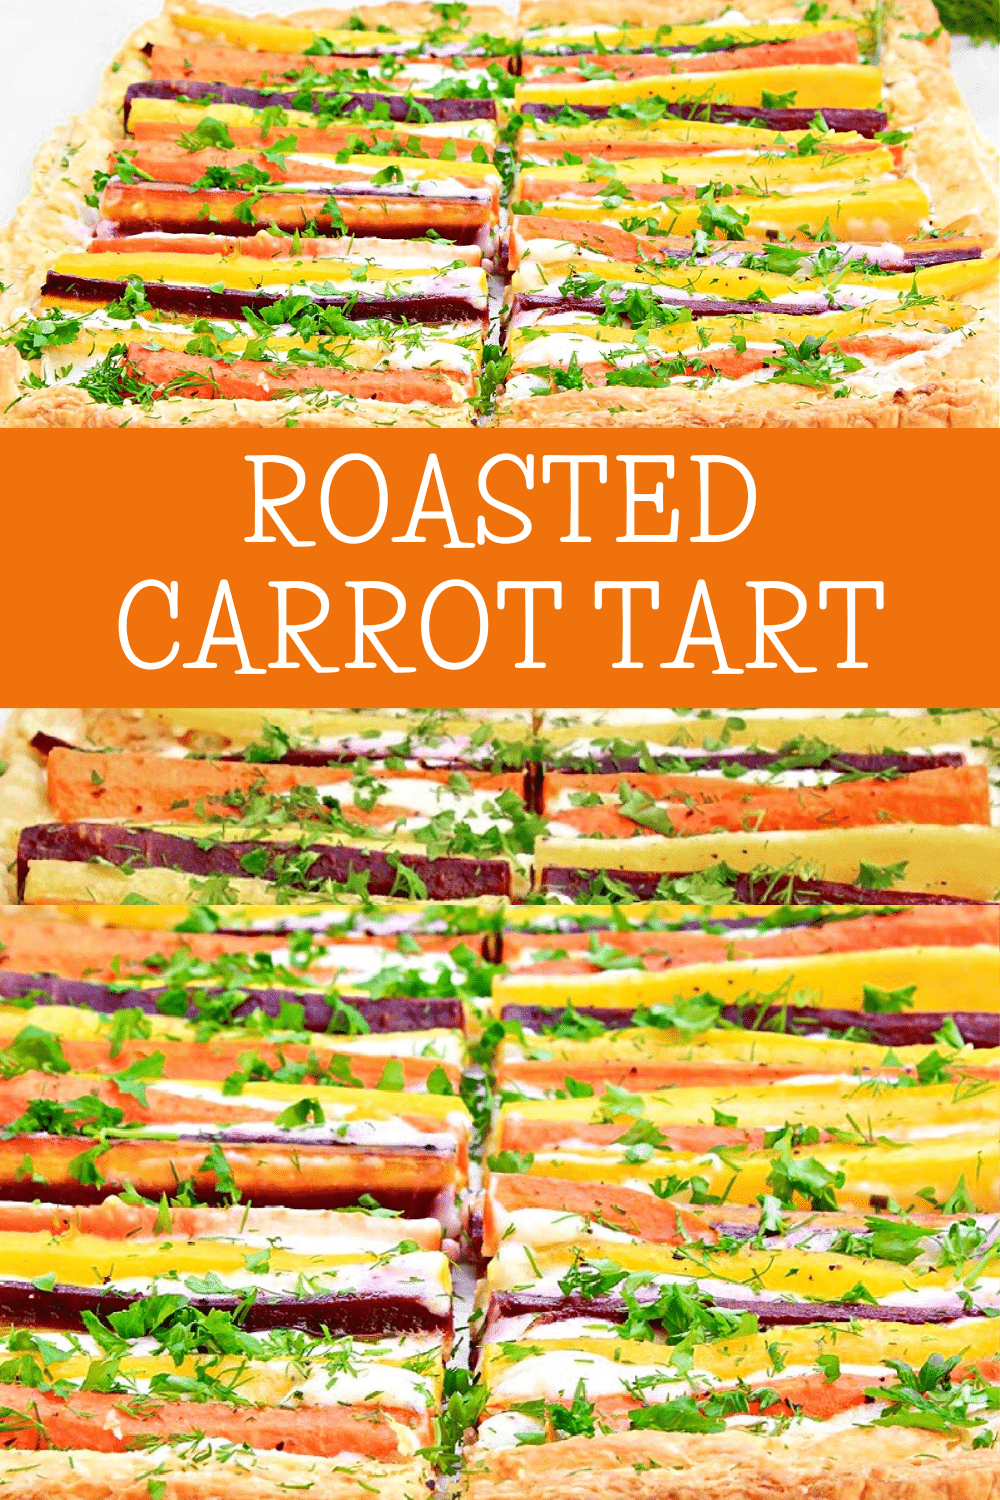 Carrot Tart ~ This crowd-pleasing tart makes a delicious and colorful addition to your Easter brunch or dinner table!  via @thiswifecooks